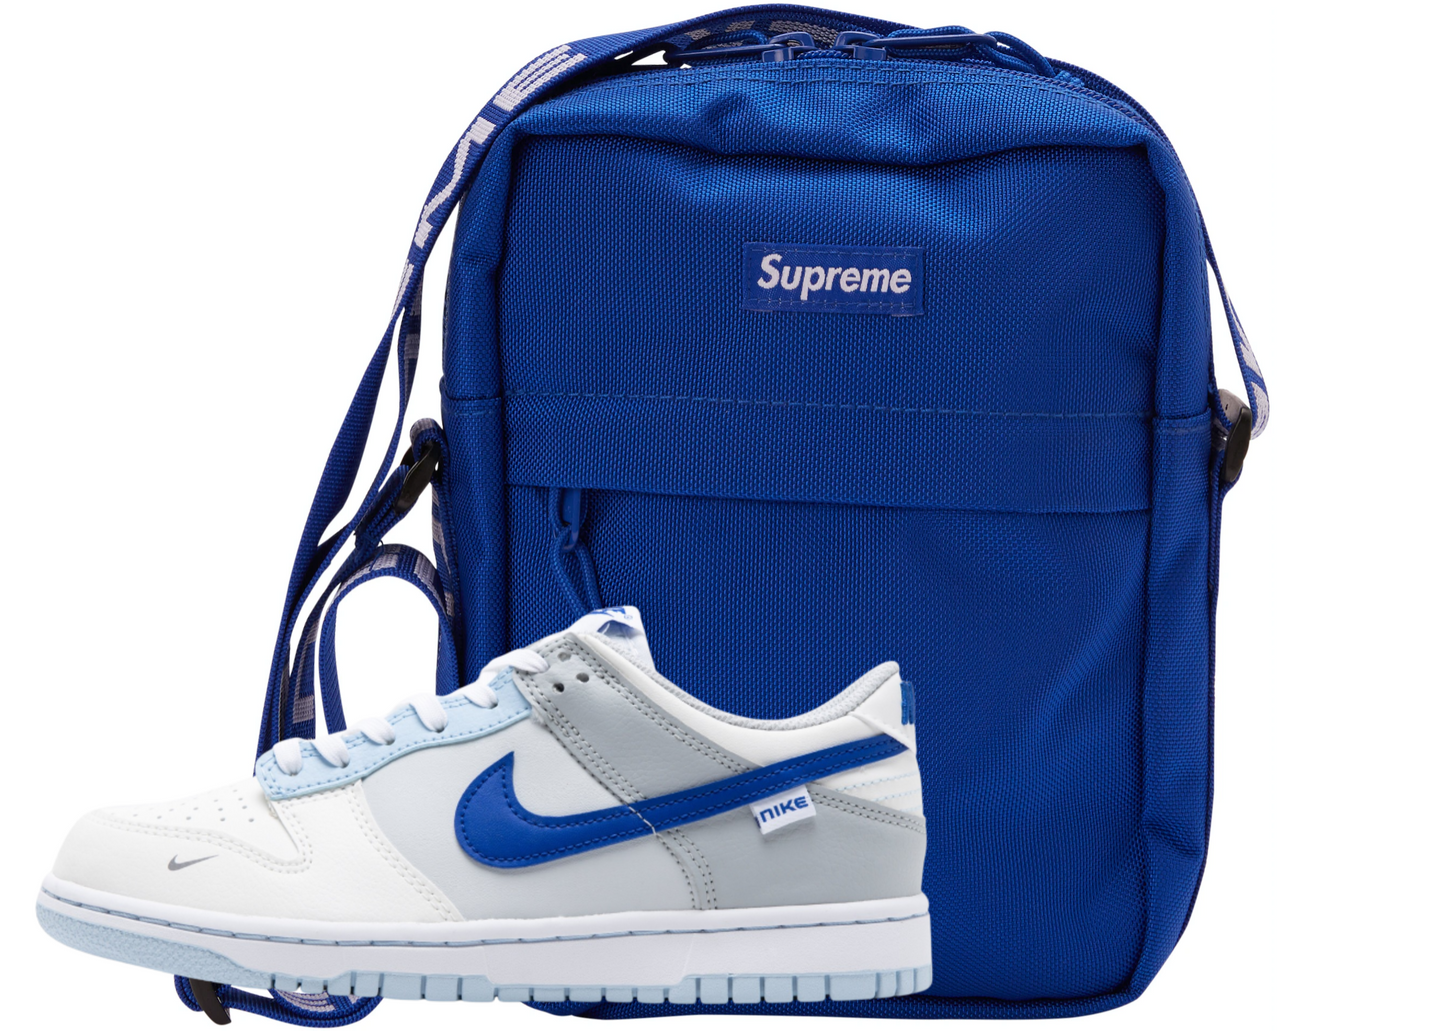 Nike Dunk low x Supreme bags combo - WORLDOFSHOES